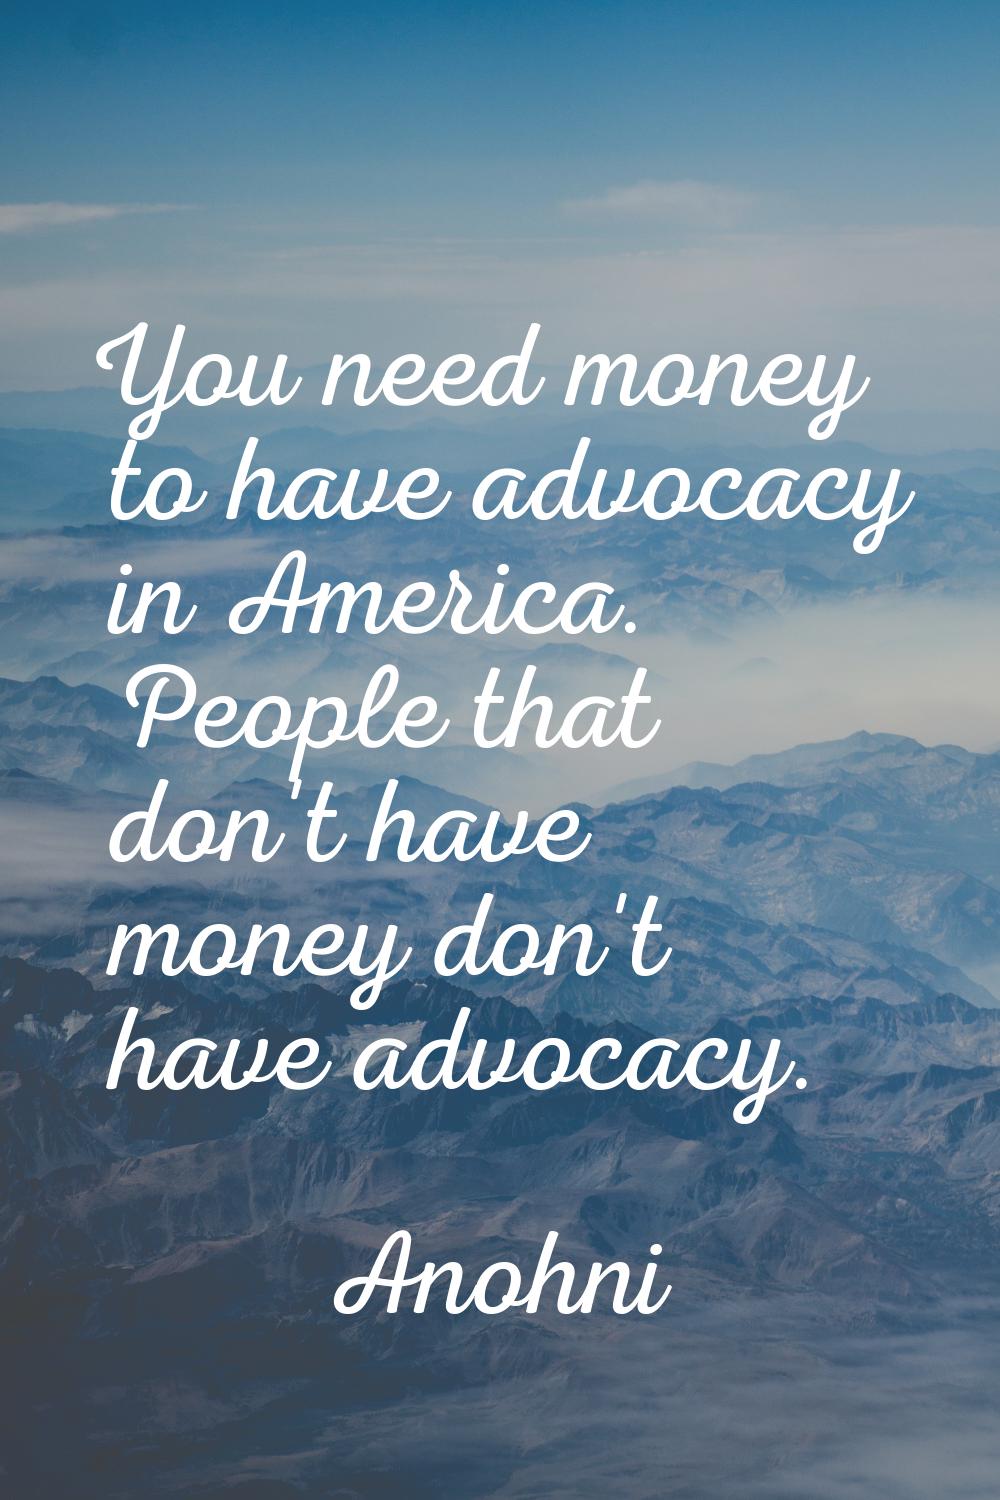 You need money to have advocacy in America. People that don't have money don't have advocacy.